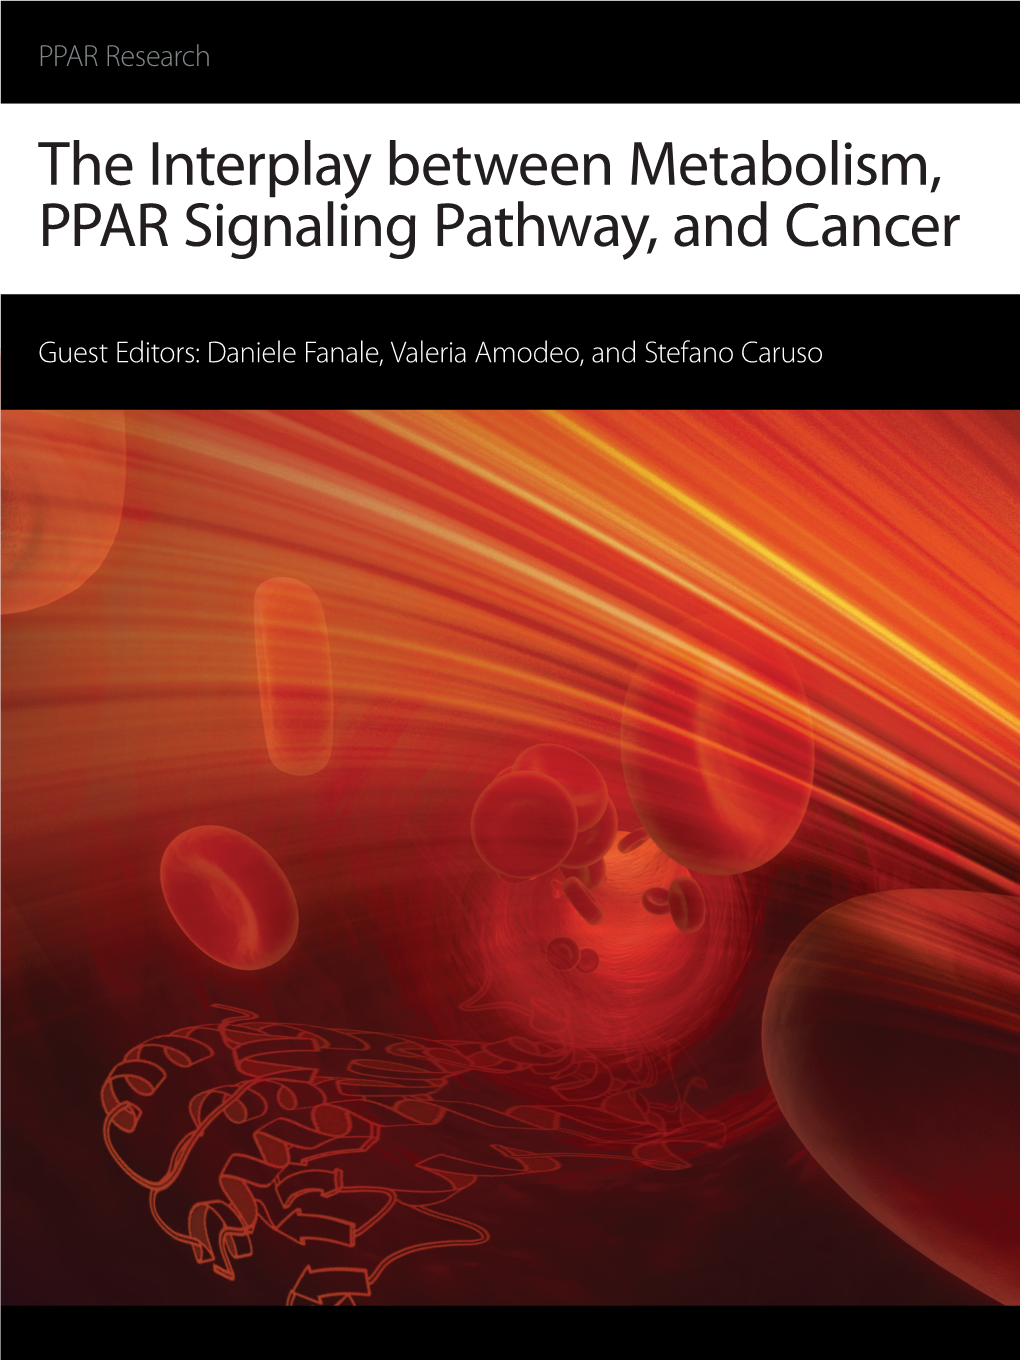 The Interplay Between Metabolism, PPAR Signaling Pathway, and Cancer